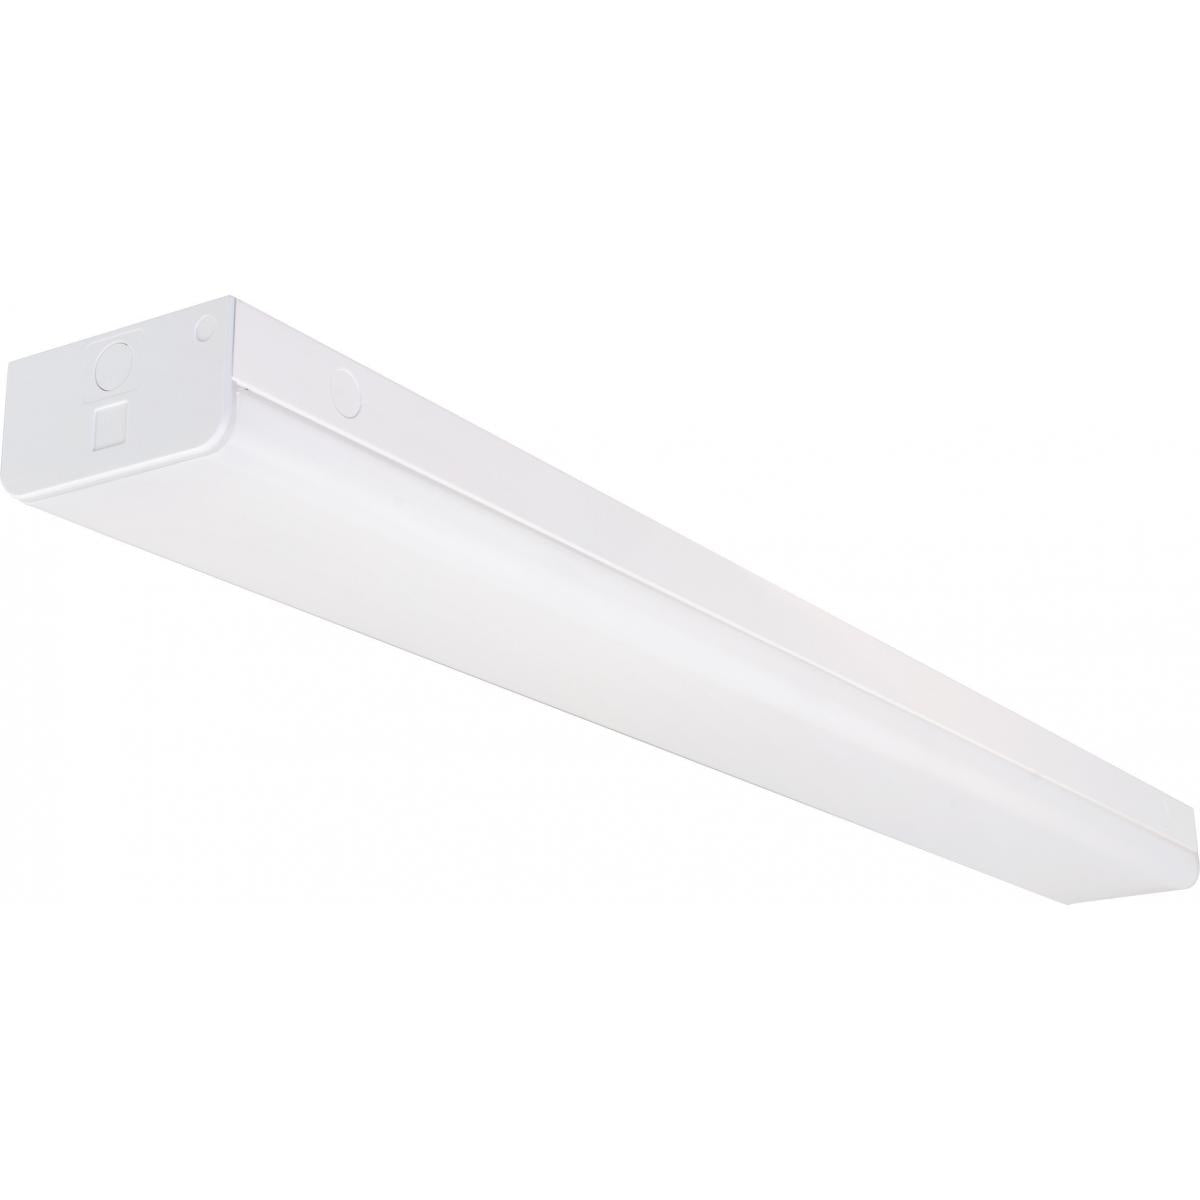 Satco 65-1142 LED 4 ft. Wide Strip Light 40W 4000K White Finish with Knockout and Sensor